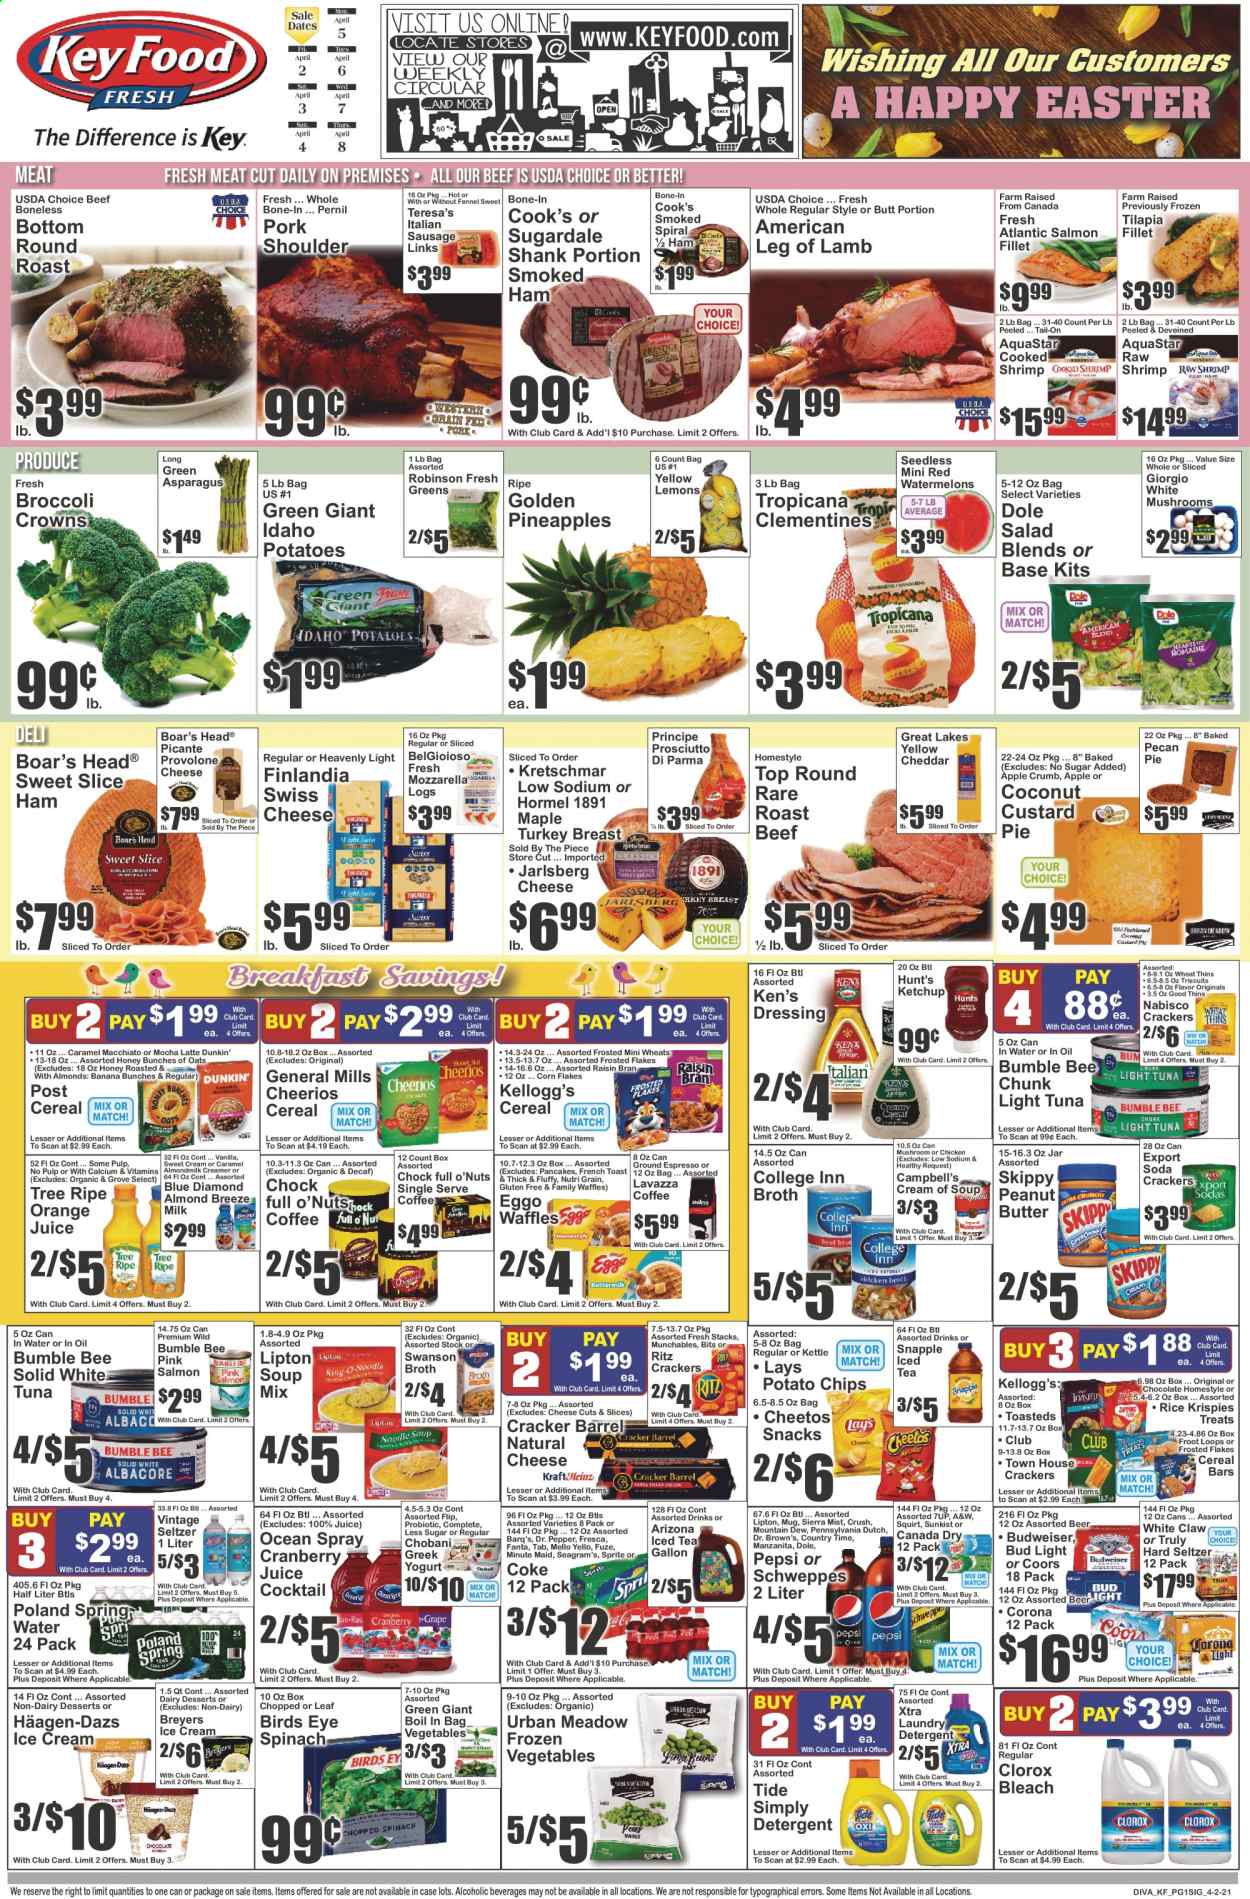 thumbnail - Key Food Flyer - 04/02/2021 - 04/08/2021 - Sales products - Dole, toast bread, pie, waffles, asparagus, broccoli, spinach, salad, salmon, salmon fillet, tilapia, tuna, shrimps, Campbell's, soup mix, soup, Bumble Bee, Bird's Eye, Hormel, ham, prosciutto, smoked ham, sausage, italian sausage, mozzarella, swiss cheese, cheese, custard, yoghurt, Chobani, Almond Breeze, milk, ice cream, Häagen-Dazs, frozen vegetables, chocolate, cereal bar, crackers, Kellogg's, RITZ, potato chips, Cheetos, snack, Lay’s, broth, light tuna, cereals, Cheerios, Rice Krispies, Frosted Flakes, Raisin Bran, Nutri-Grain, caramel, ketchup, dressing, peanut butter, Blue Diamond, Canada Dry, Coca-Cola, Mountain Dew, Schweppes, Sprite, Pepsi, orange juice, soda, juice, Fanta, Lipton, AriZona, Snapple, Country Time, seltzer water, spring water, coffee, Lavazza, Cook's, White Claw, Hard Seltzer, TRULY, beer, Budweiser, Coors, Bud Light, Corona Extra, turkey breast, beef meat, round roast, roast beef, lamb leg, detergent, Clorox, Tide, bleach, laundry detergent, XTRA, mug, bunches, calcium, clementines, pineapple, lemons. Page 1.